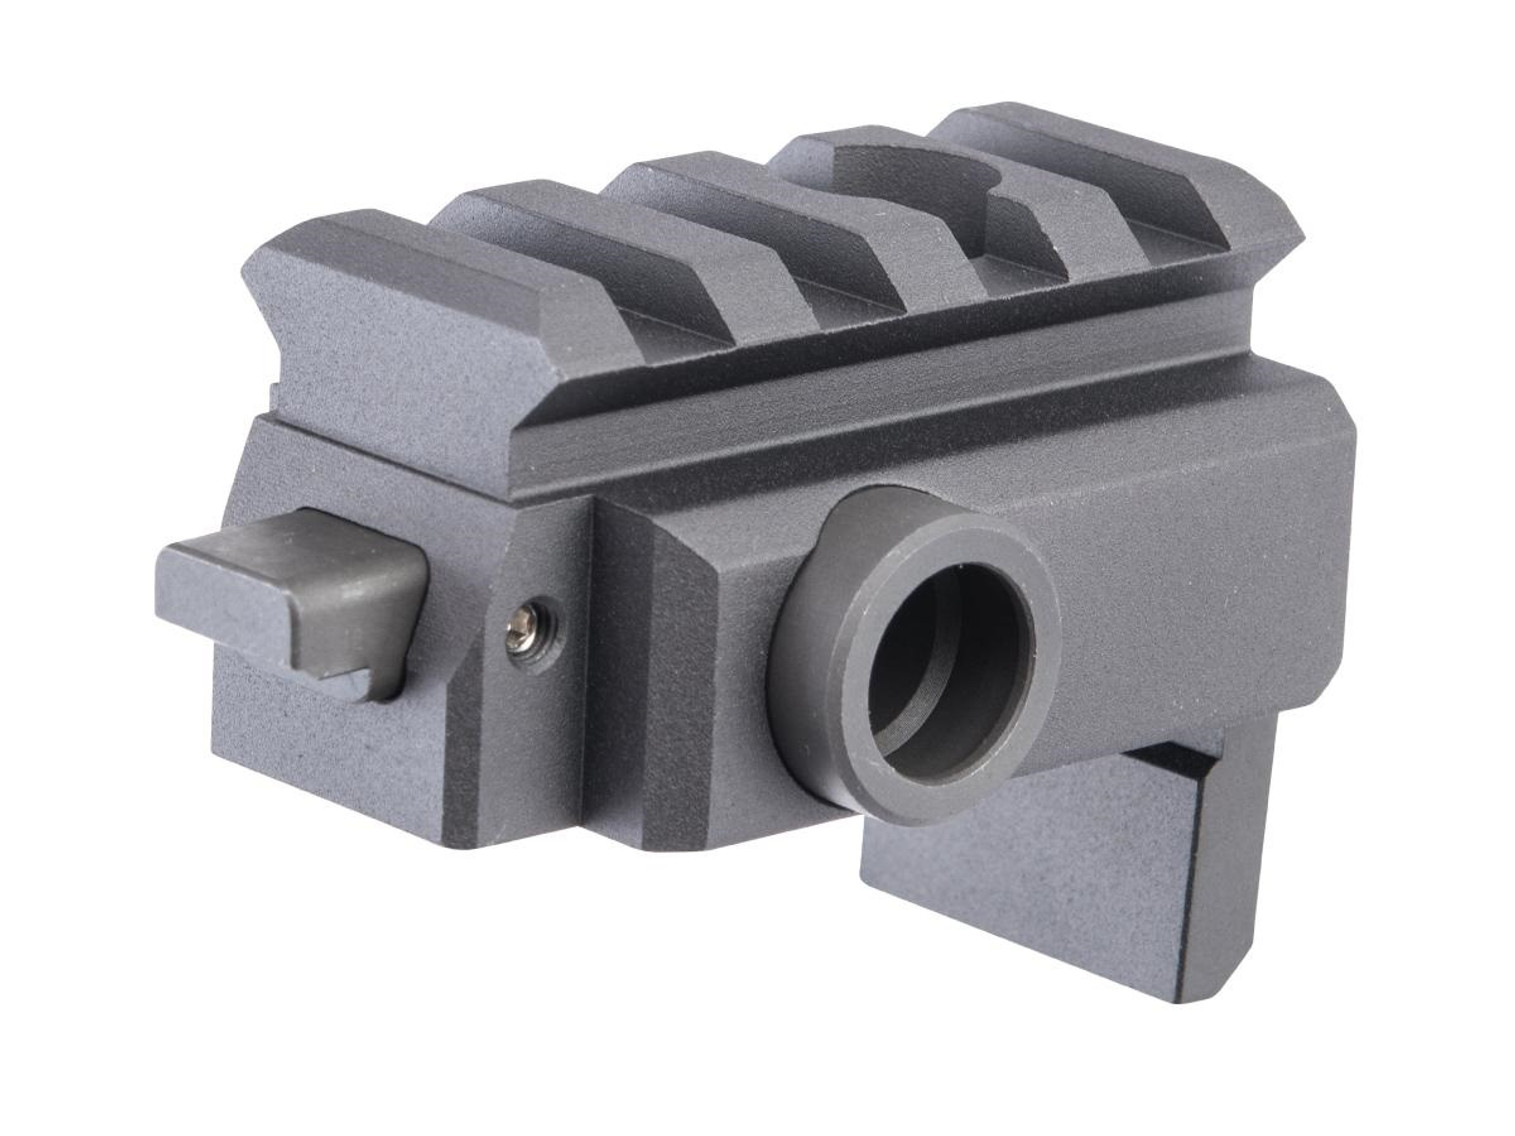 NORTHEAST AIRSOFT CNC M1913 Stock Adapter for MP2A1 Gas Blowback Airsoft Submachine Guns